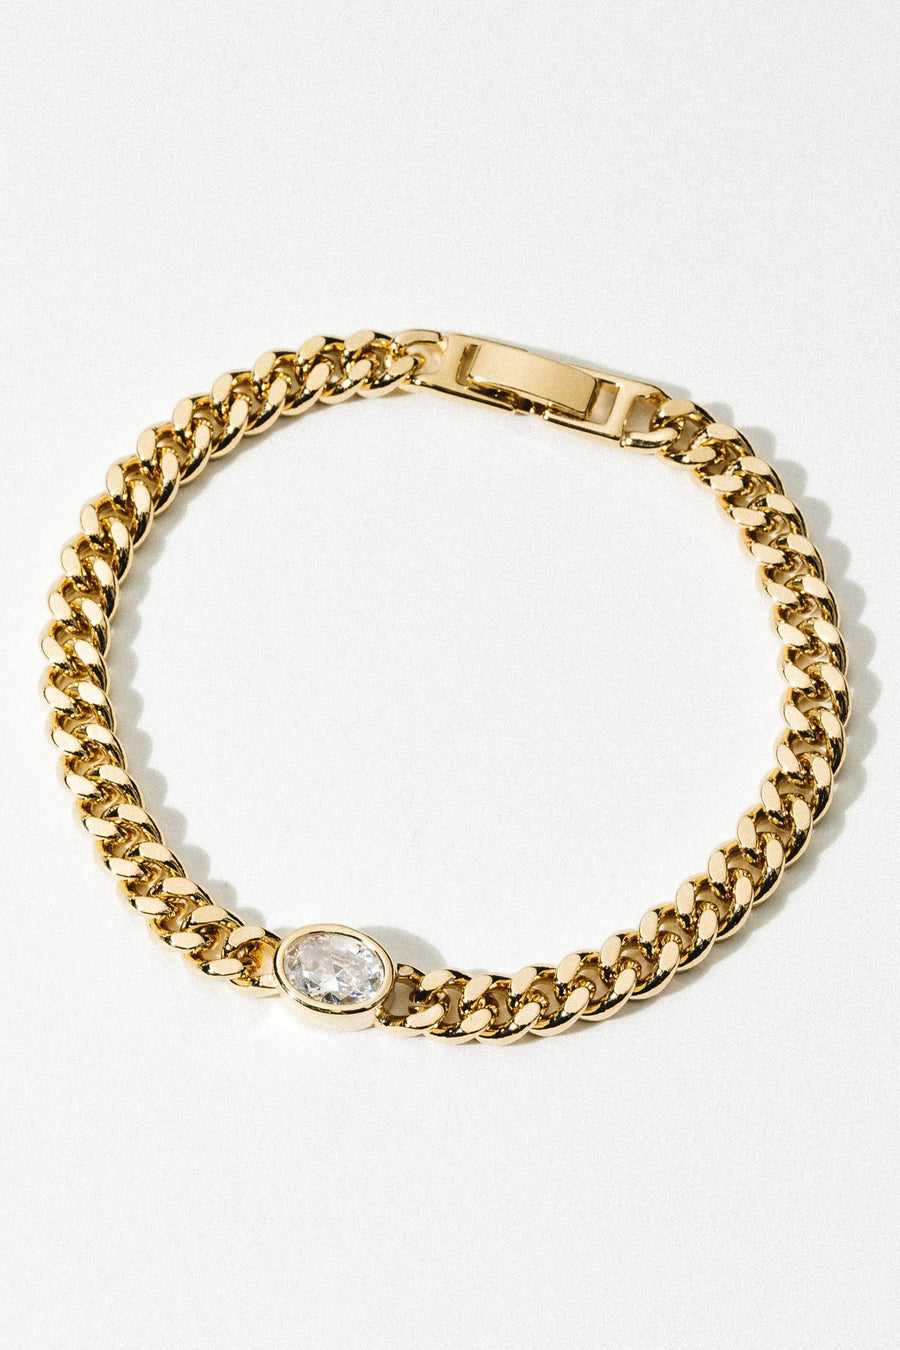 Goddess Jewelry Gold / 7 Inches Nicolette Chain Bracelet